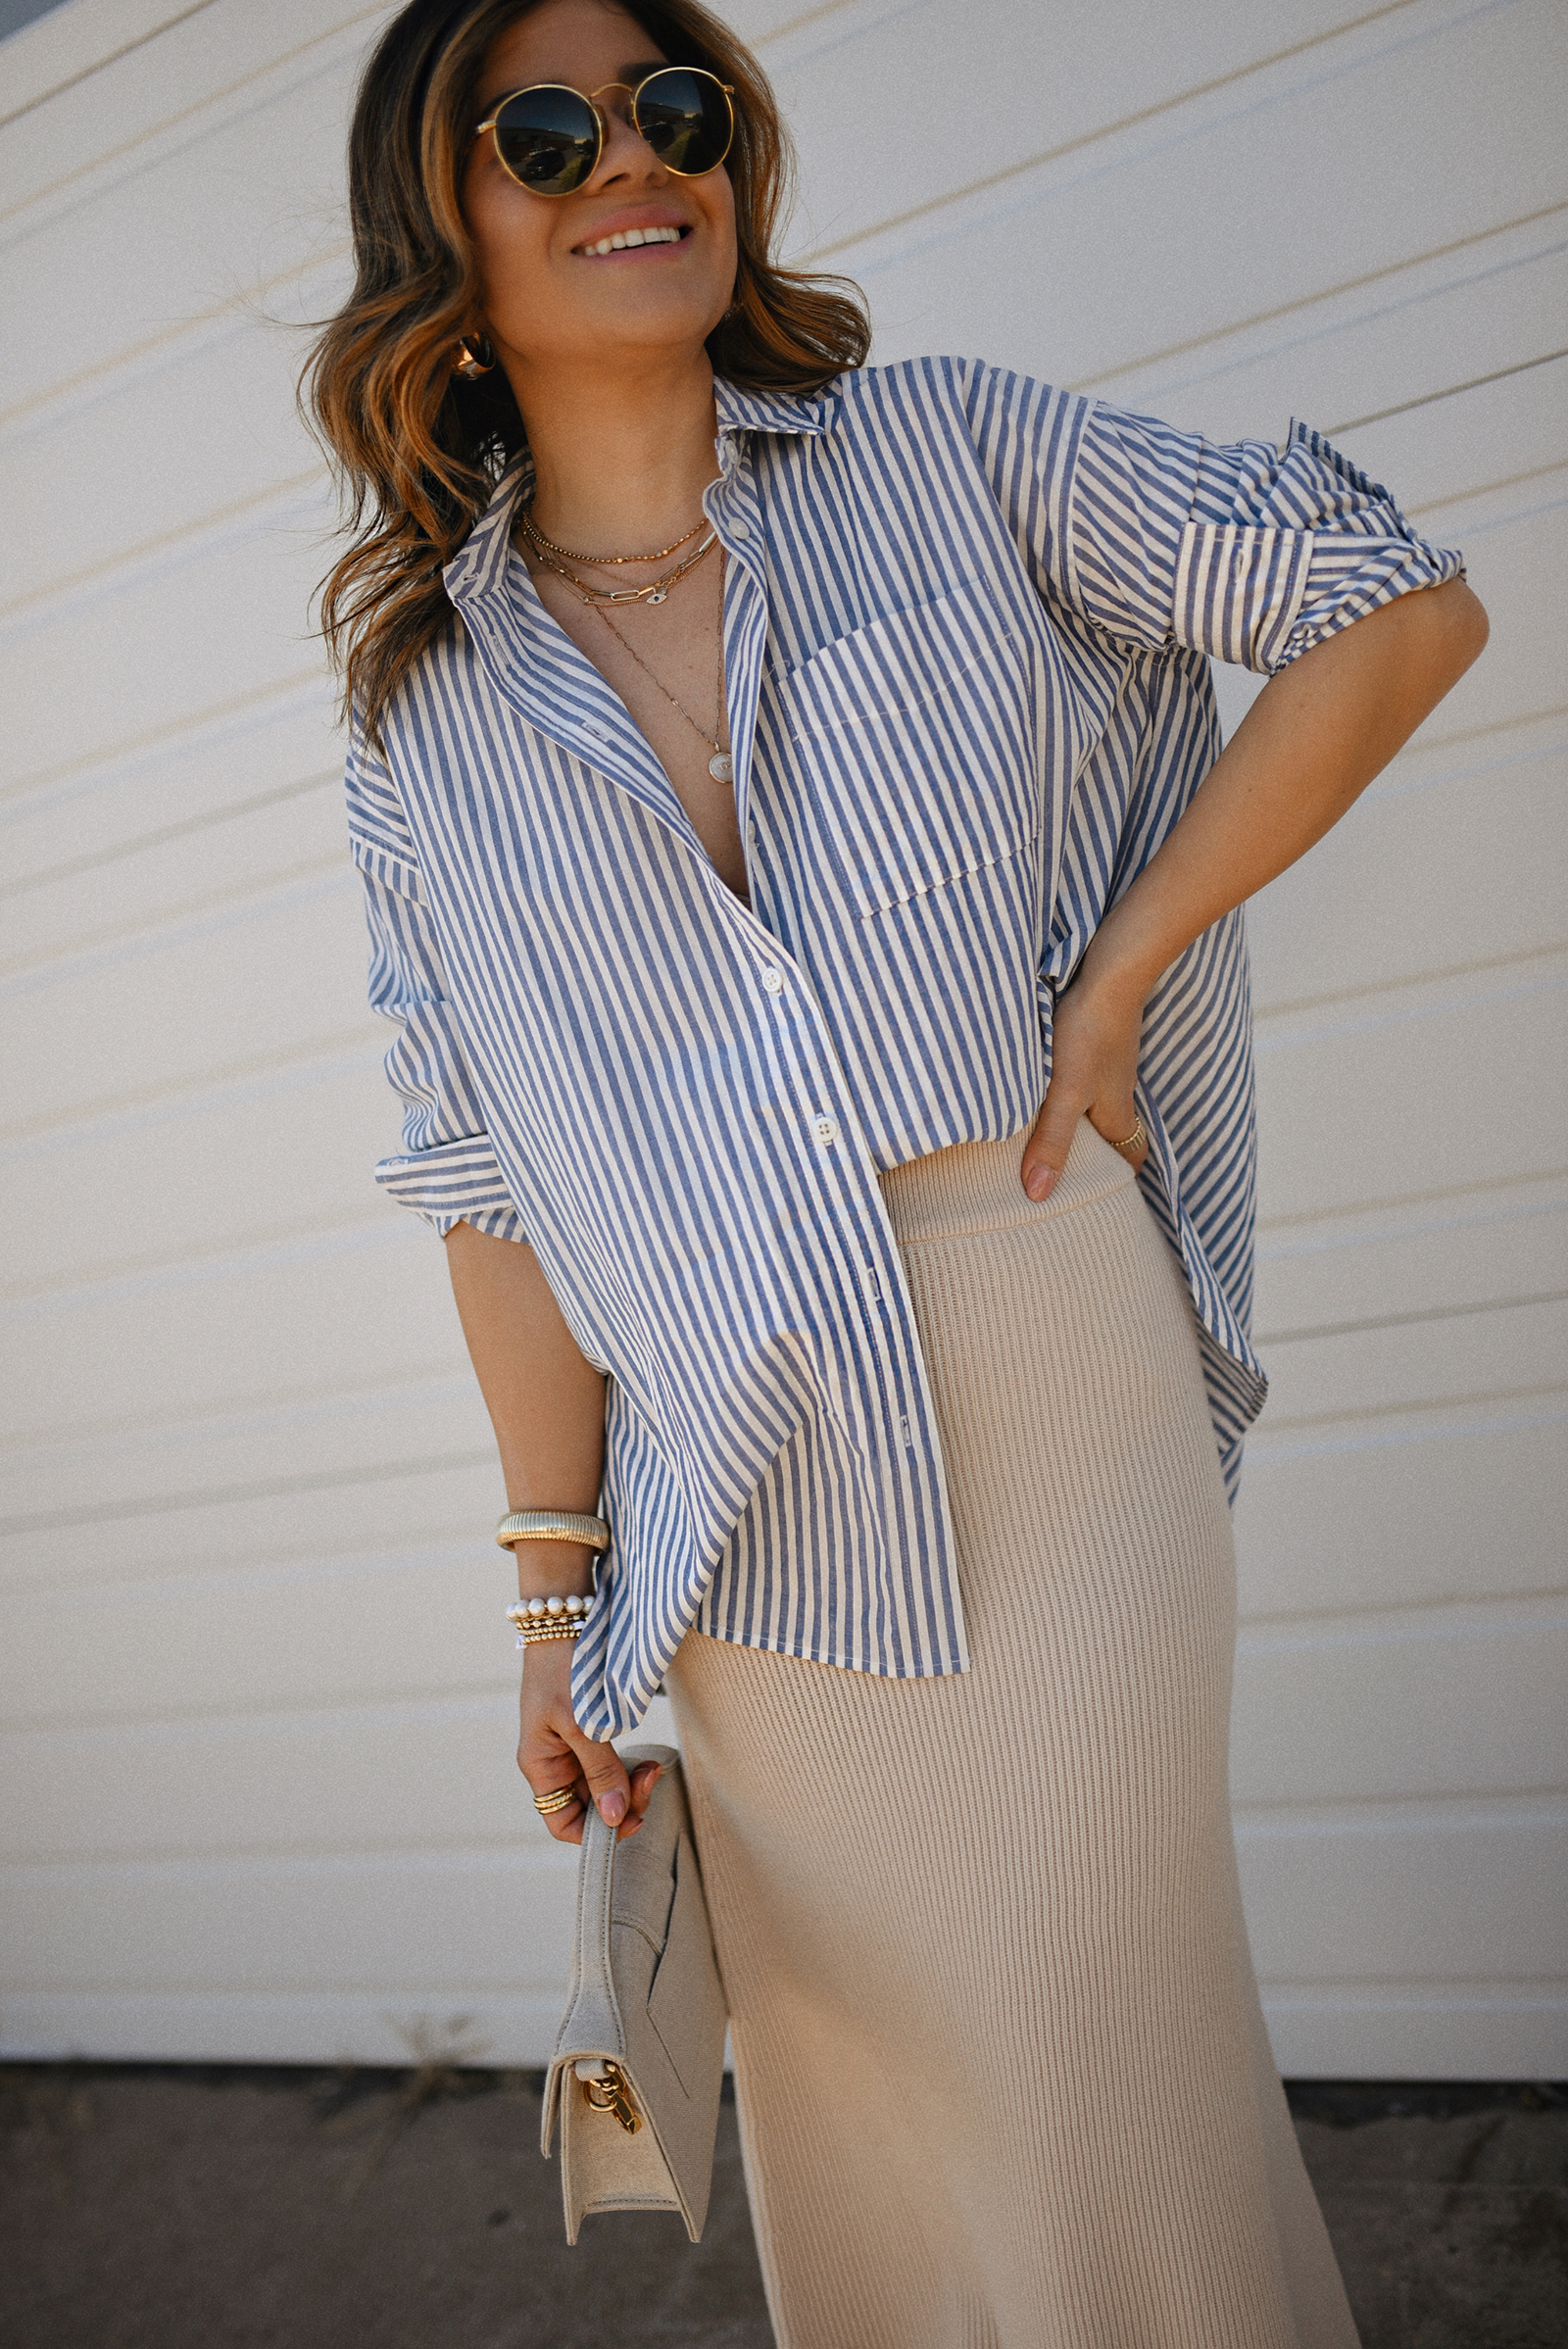 Carolina Hellal of Chic Talk wearing a Madewell striped oversize shirt, a Sezane beige skirt, black sandals and Le grand Bambino bag from Jacquemus